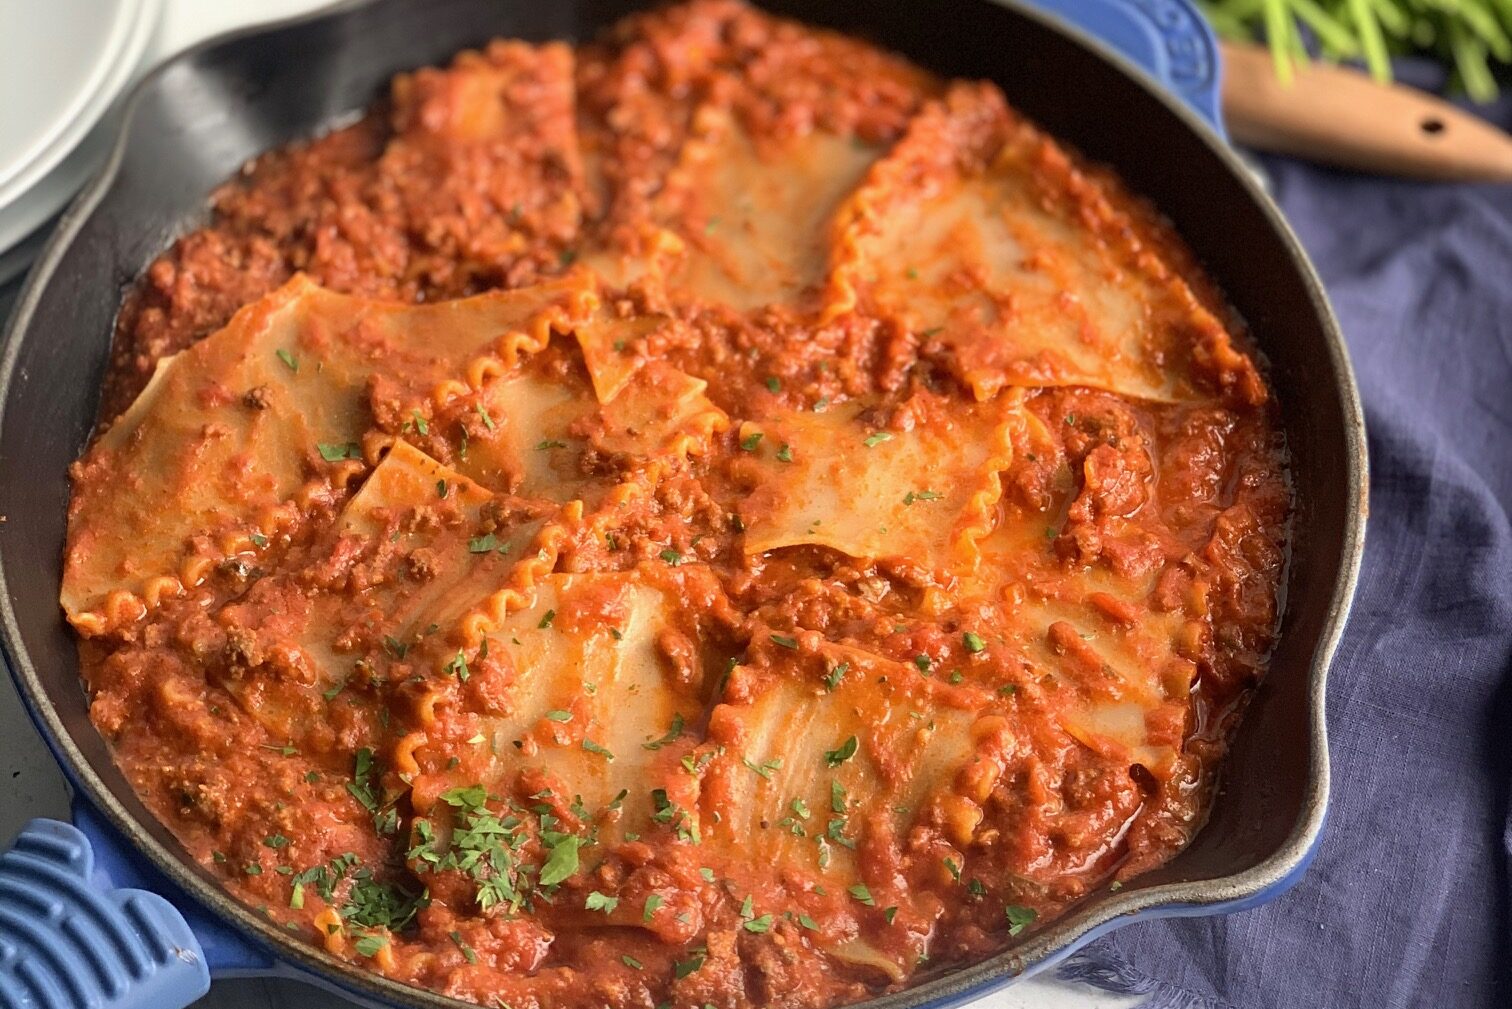 A skillet filled with tender lasagn noodles broken into pieces in a meaty marinara sauce.